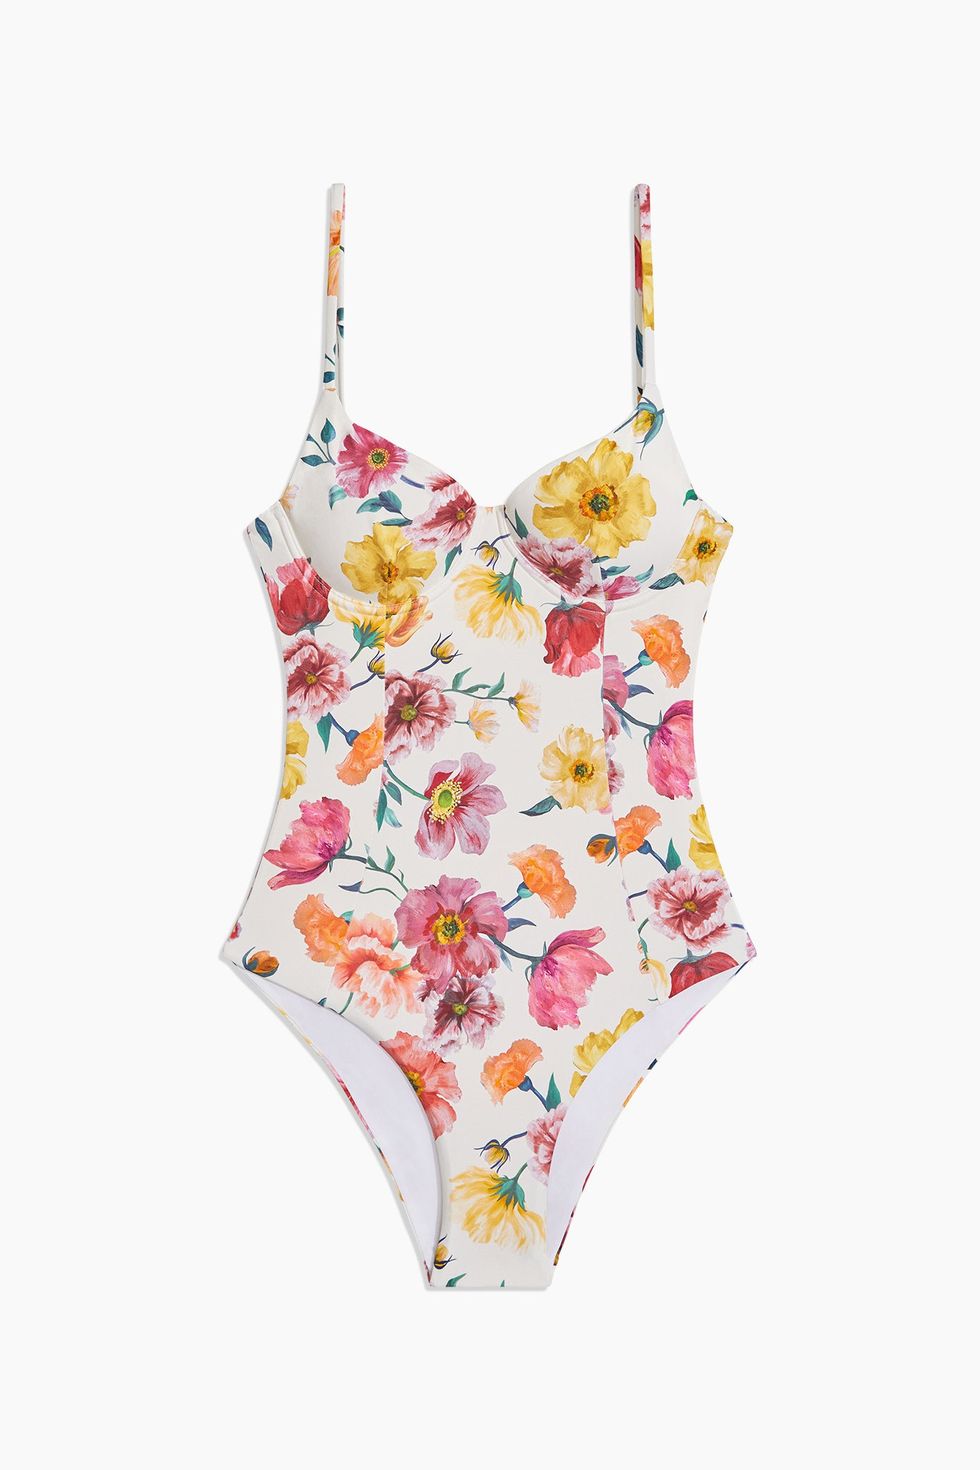 Onia and Liberty London Collaborate on New Swim Collection